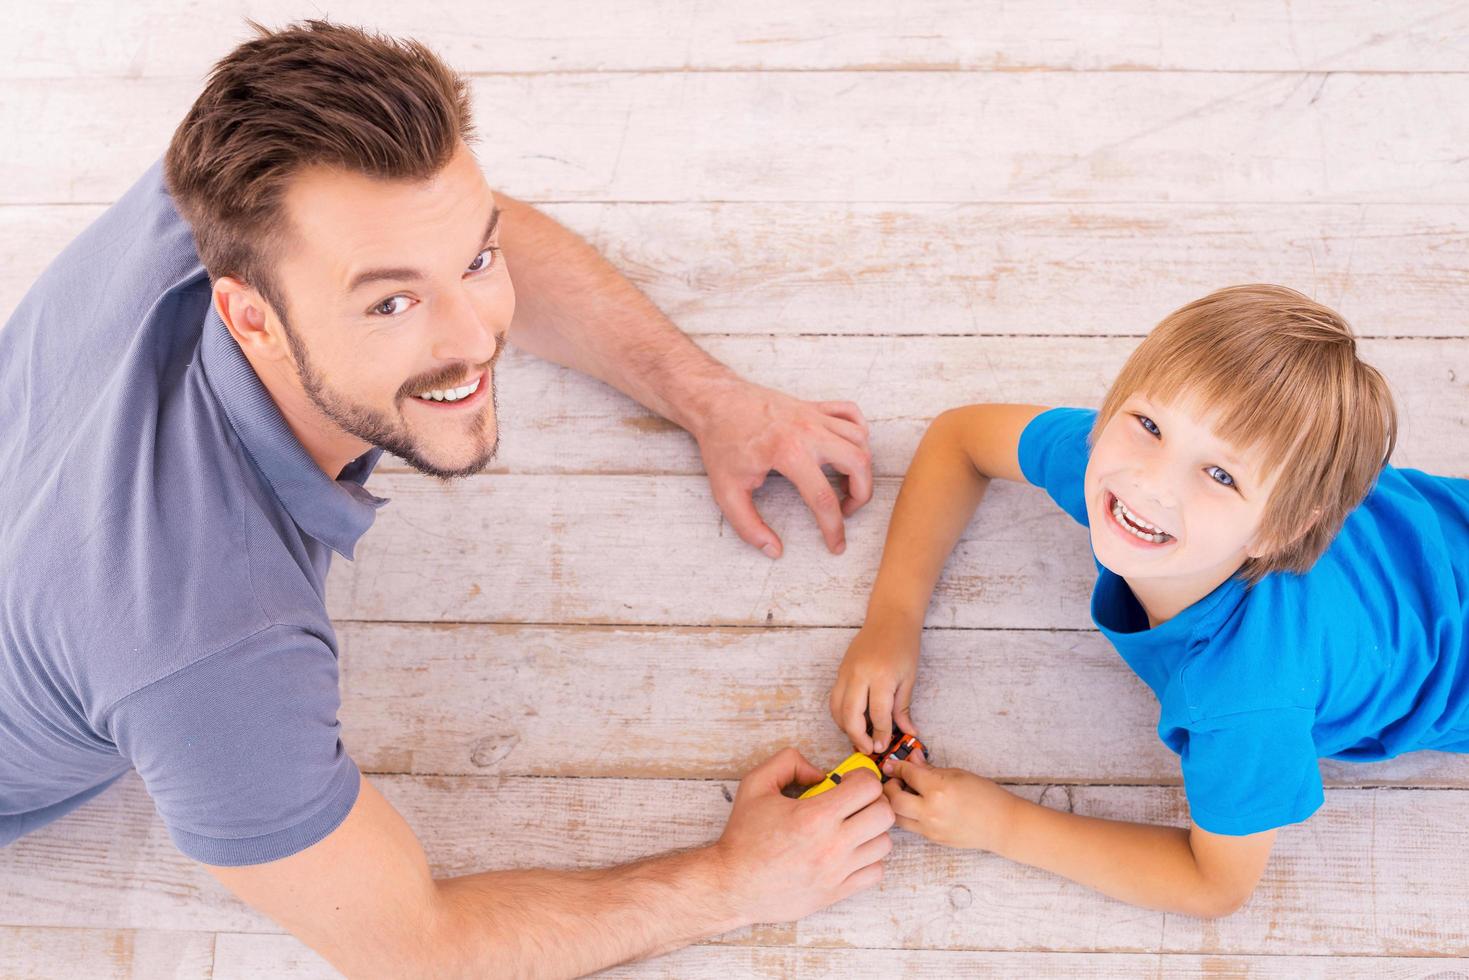 Playing together. Top view of happy father and son playing toy cars and looking up with smile while lying on the hardwood floor together photo